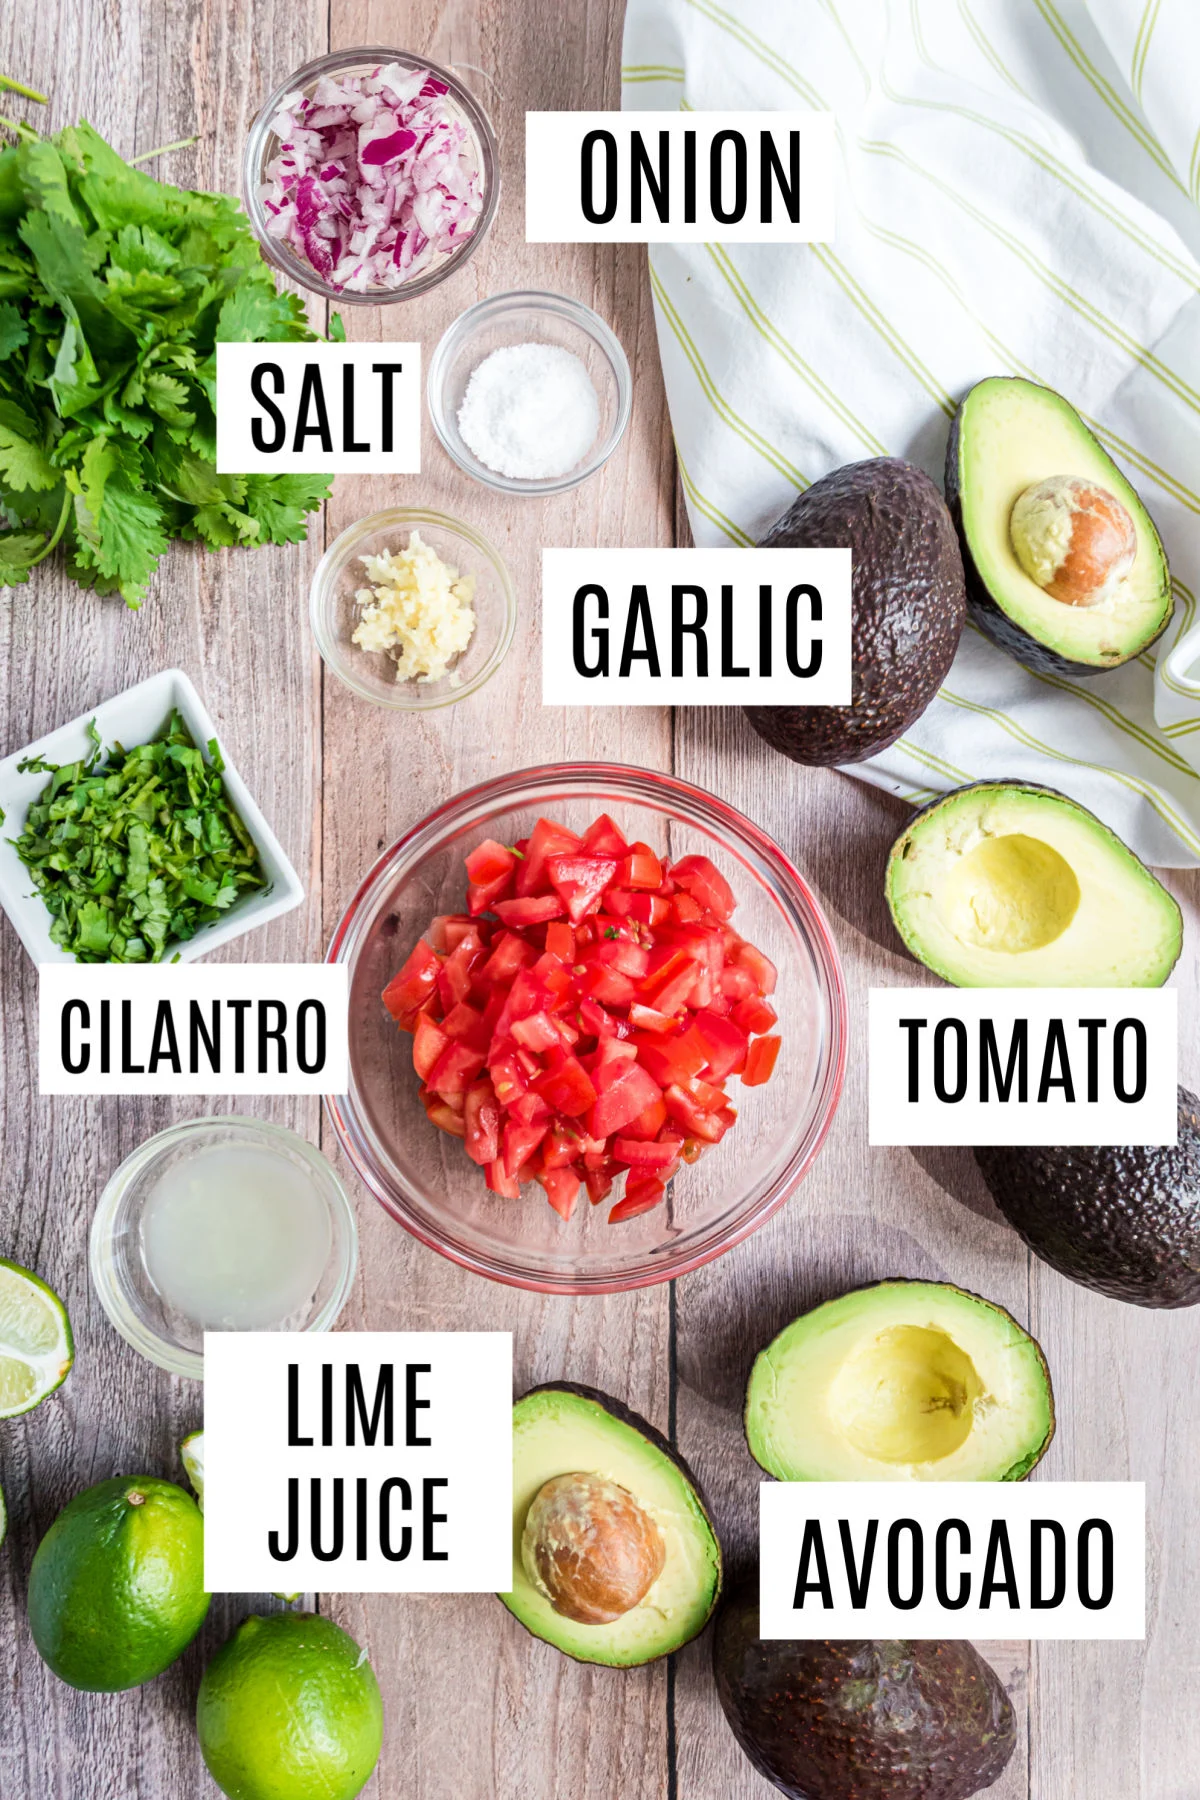 Ingredients needed for homemade guacamole recipe.